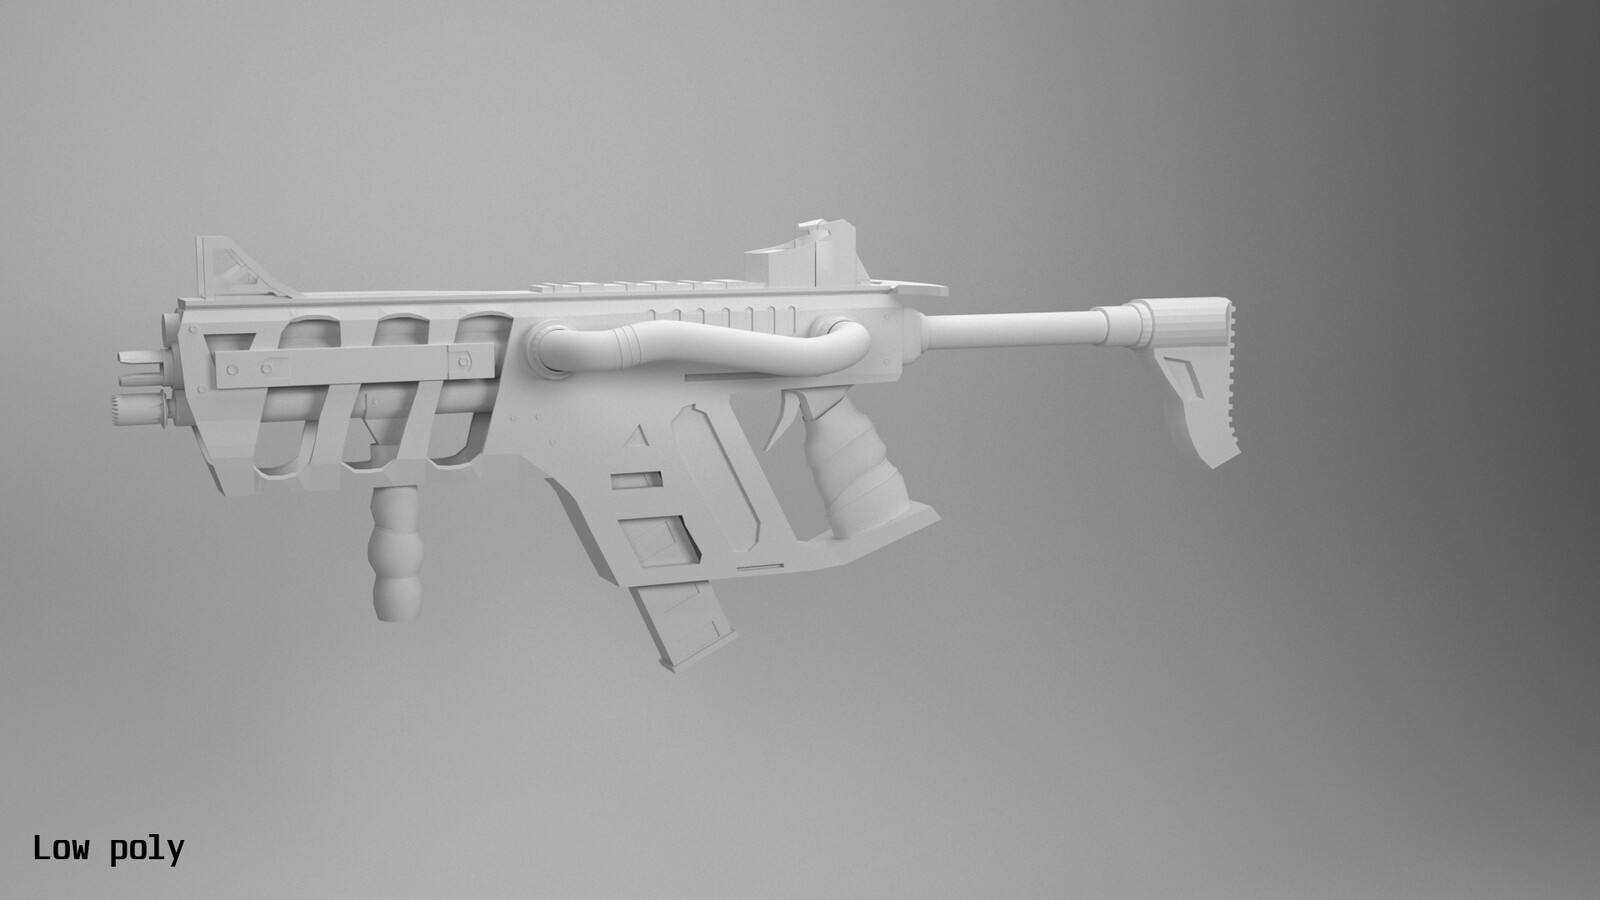 R 99 SMG from Apex Legends. 